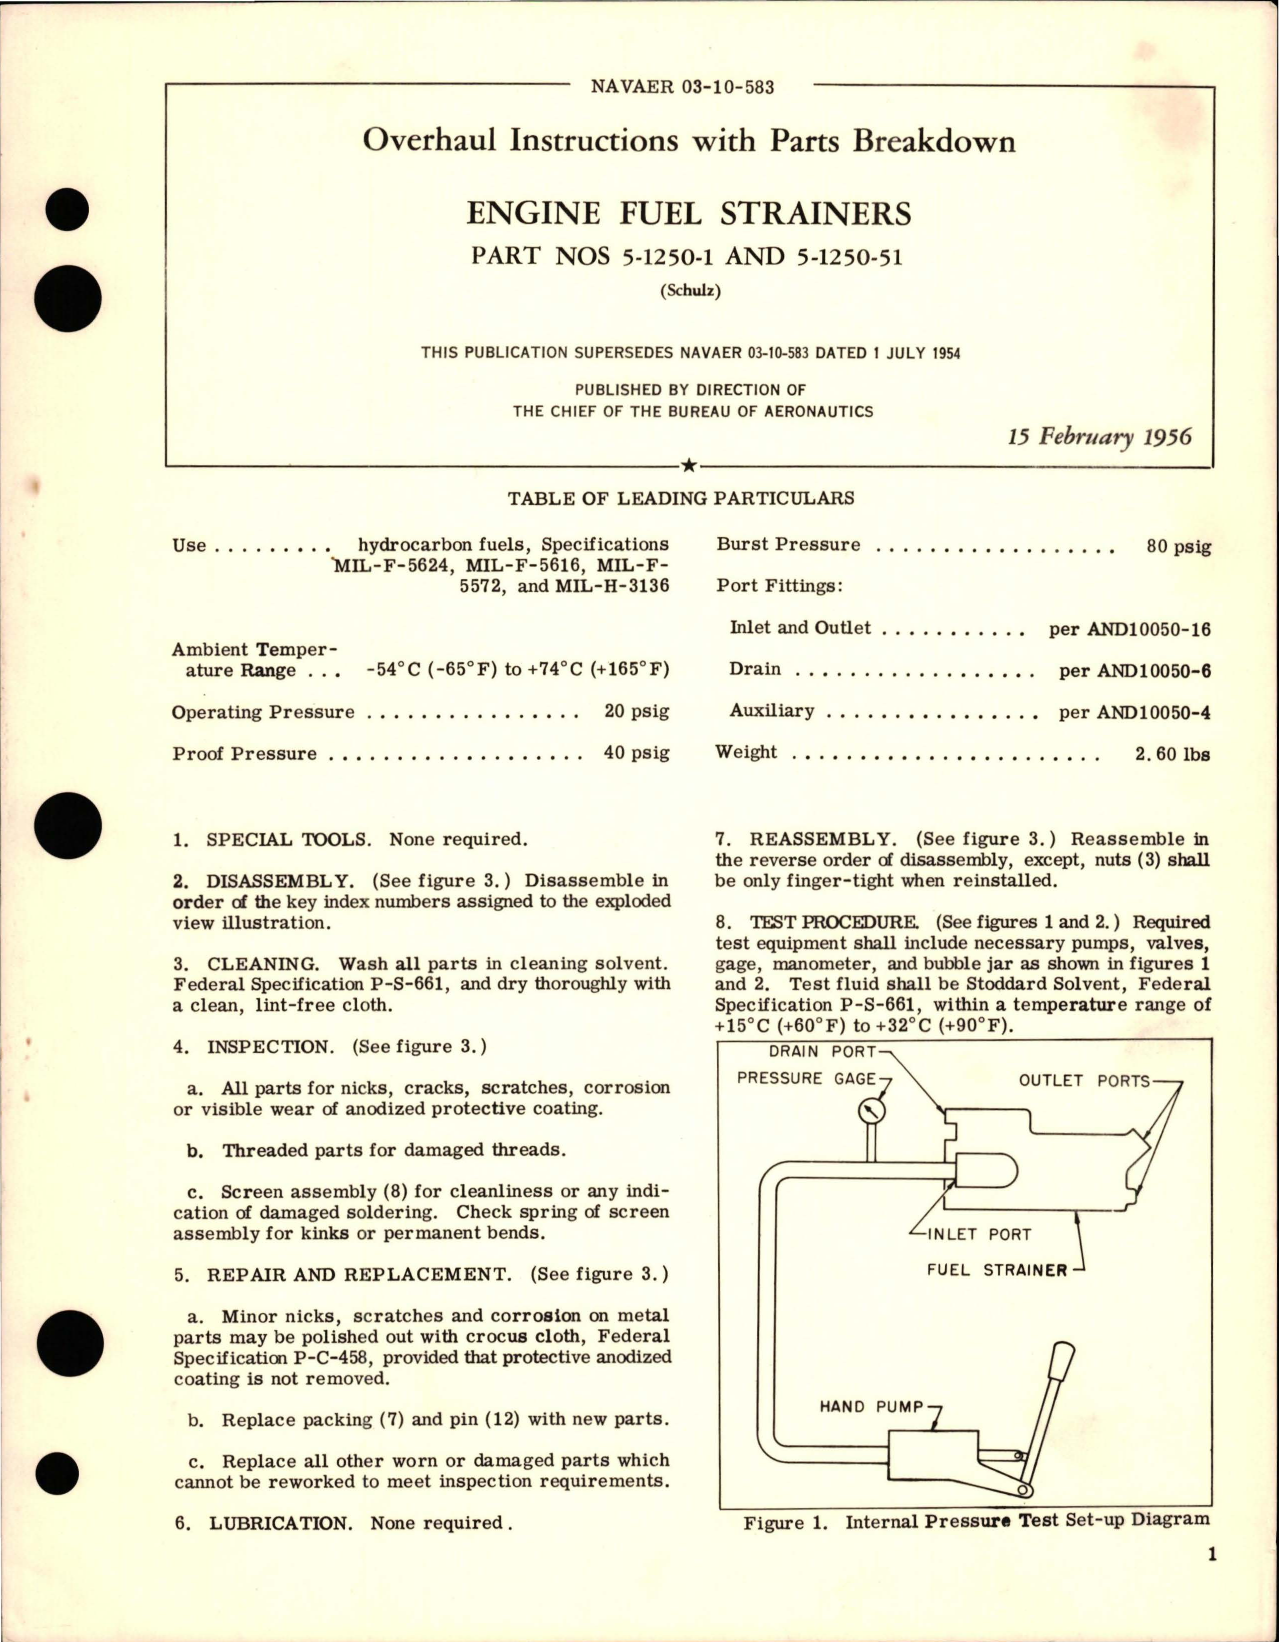 Sample page 1 from AirCorps Library document: Overhaul Instructions with Parts Breakdown for Engine Fuel Strainers - Parts 5-1250-1 and 5-1250-51